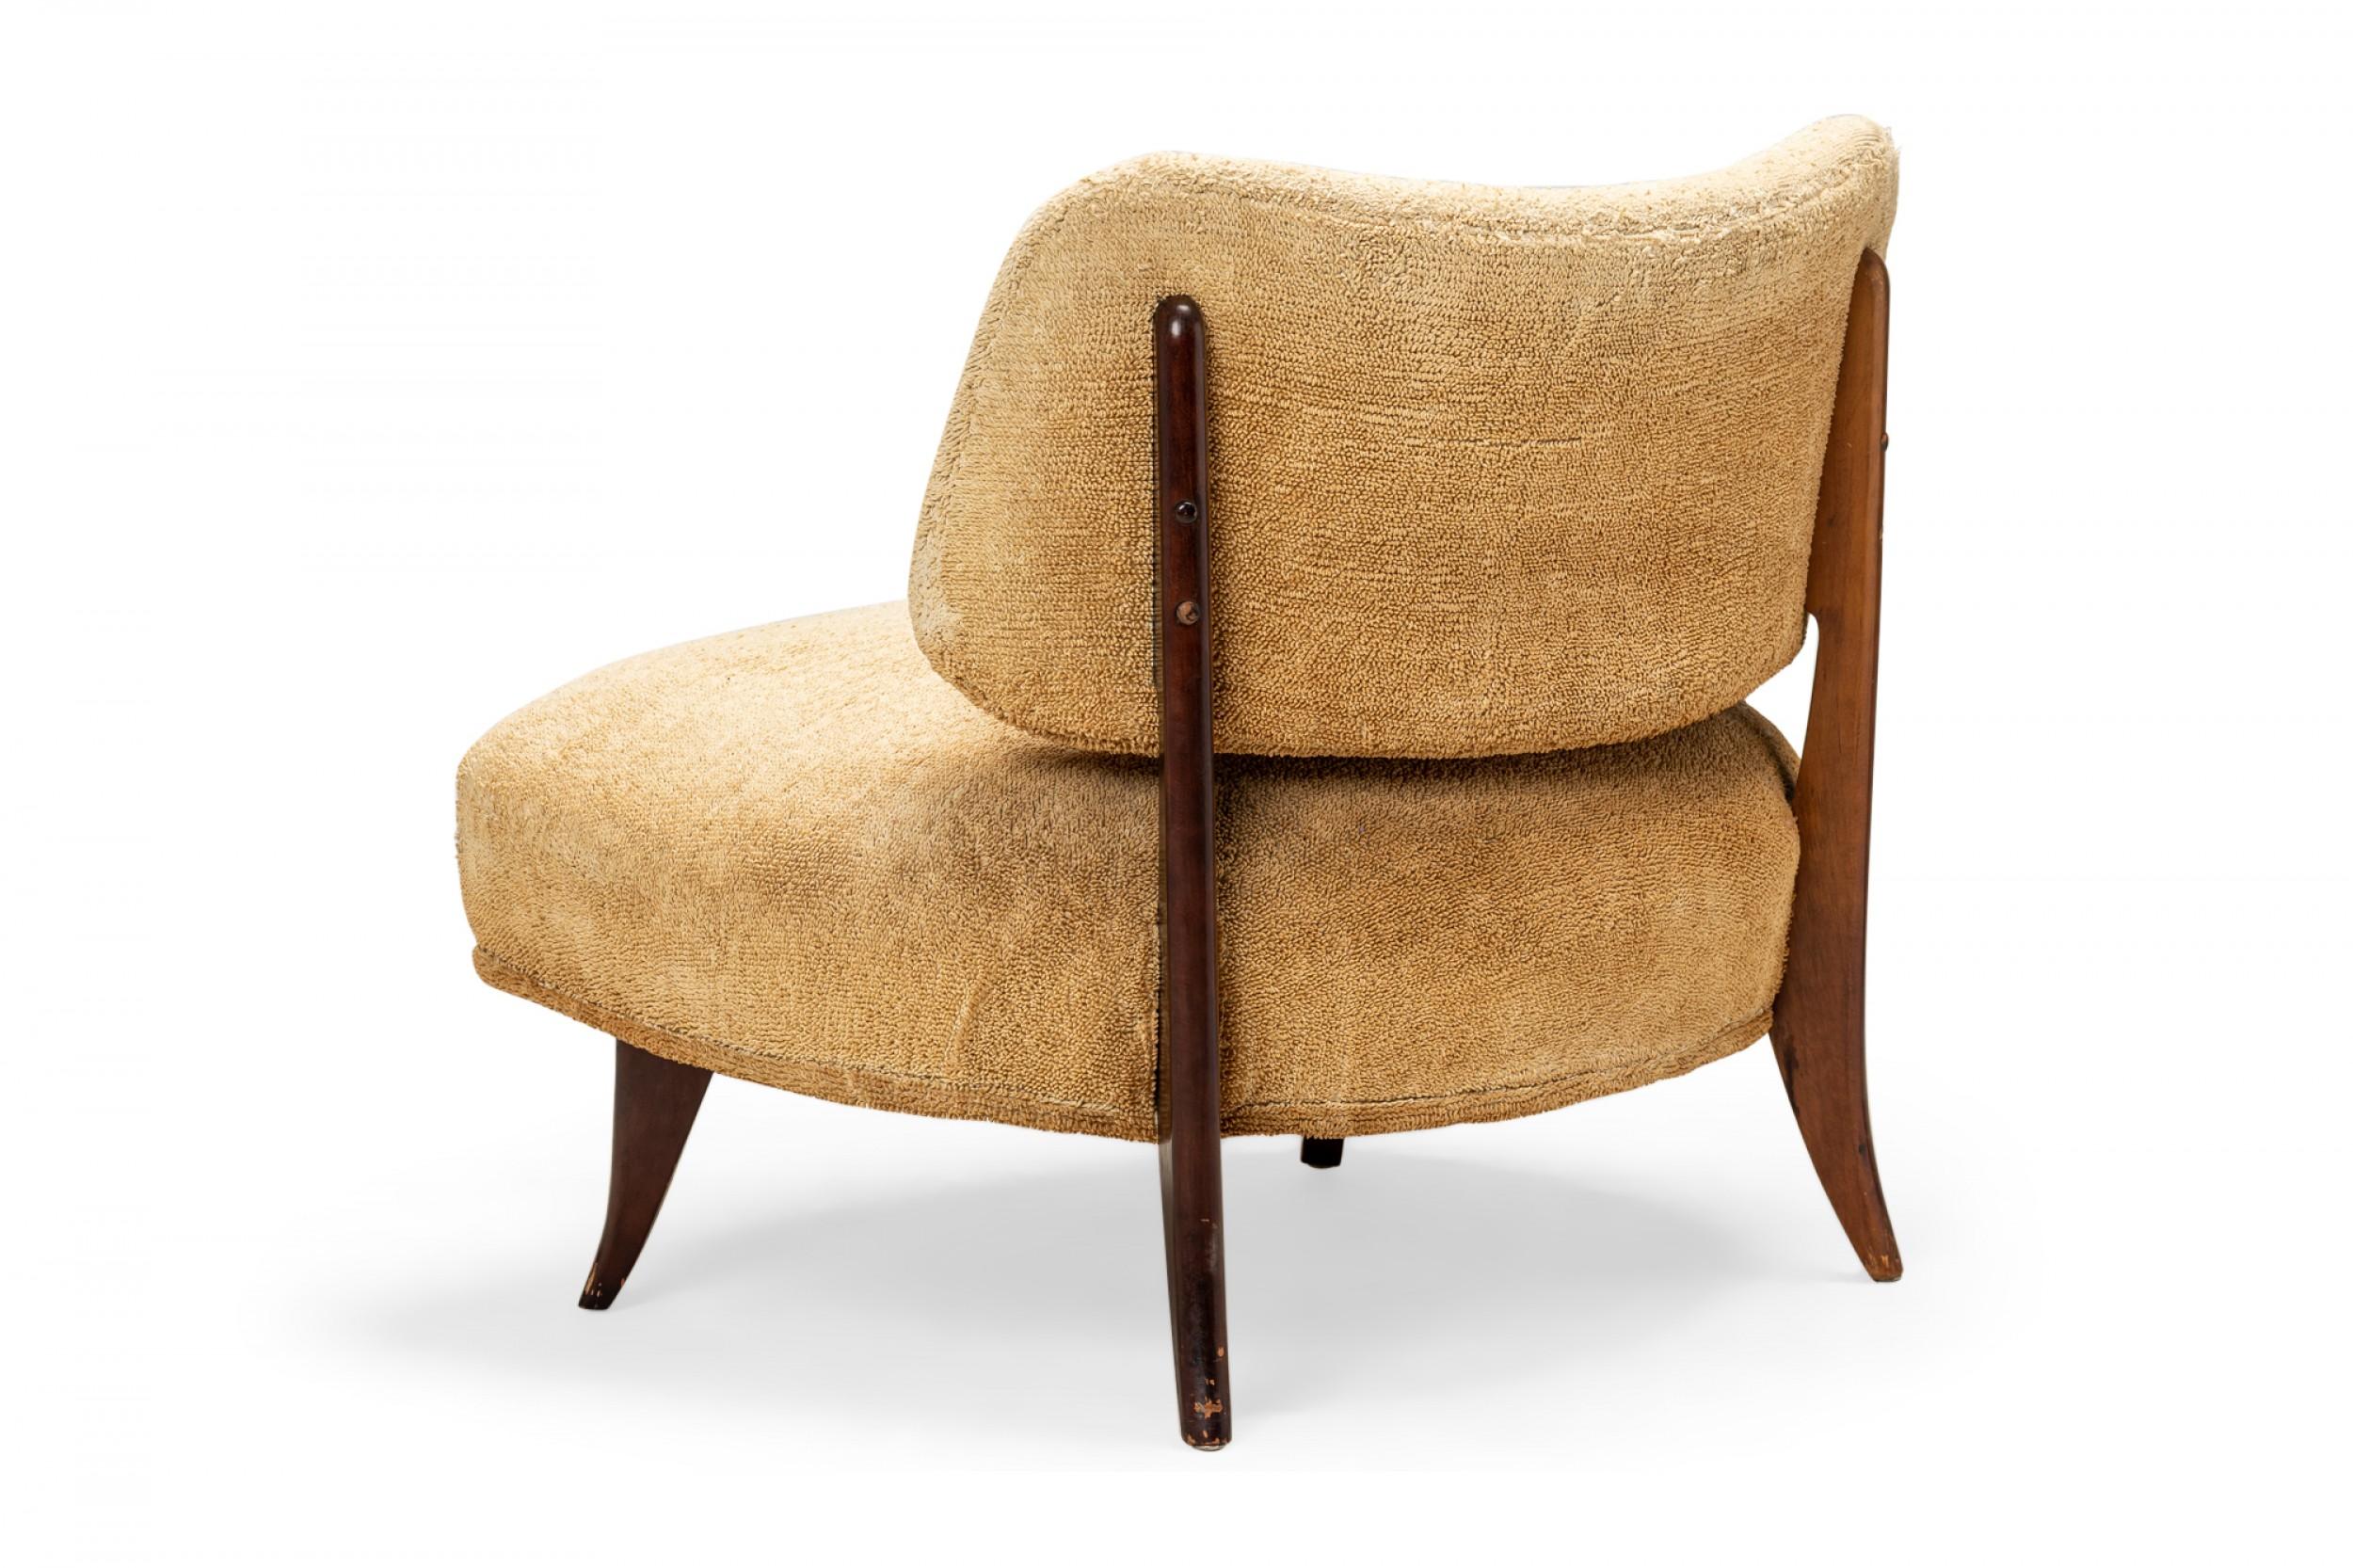 20th Century American Art Deco Low Beige Terrycloth Upholstered Slipper Chair For Sale